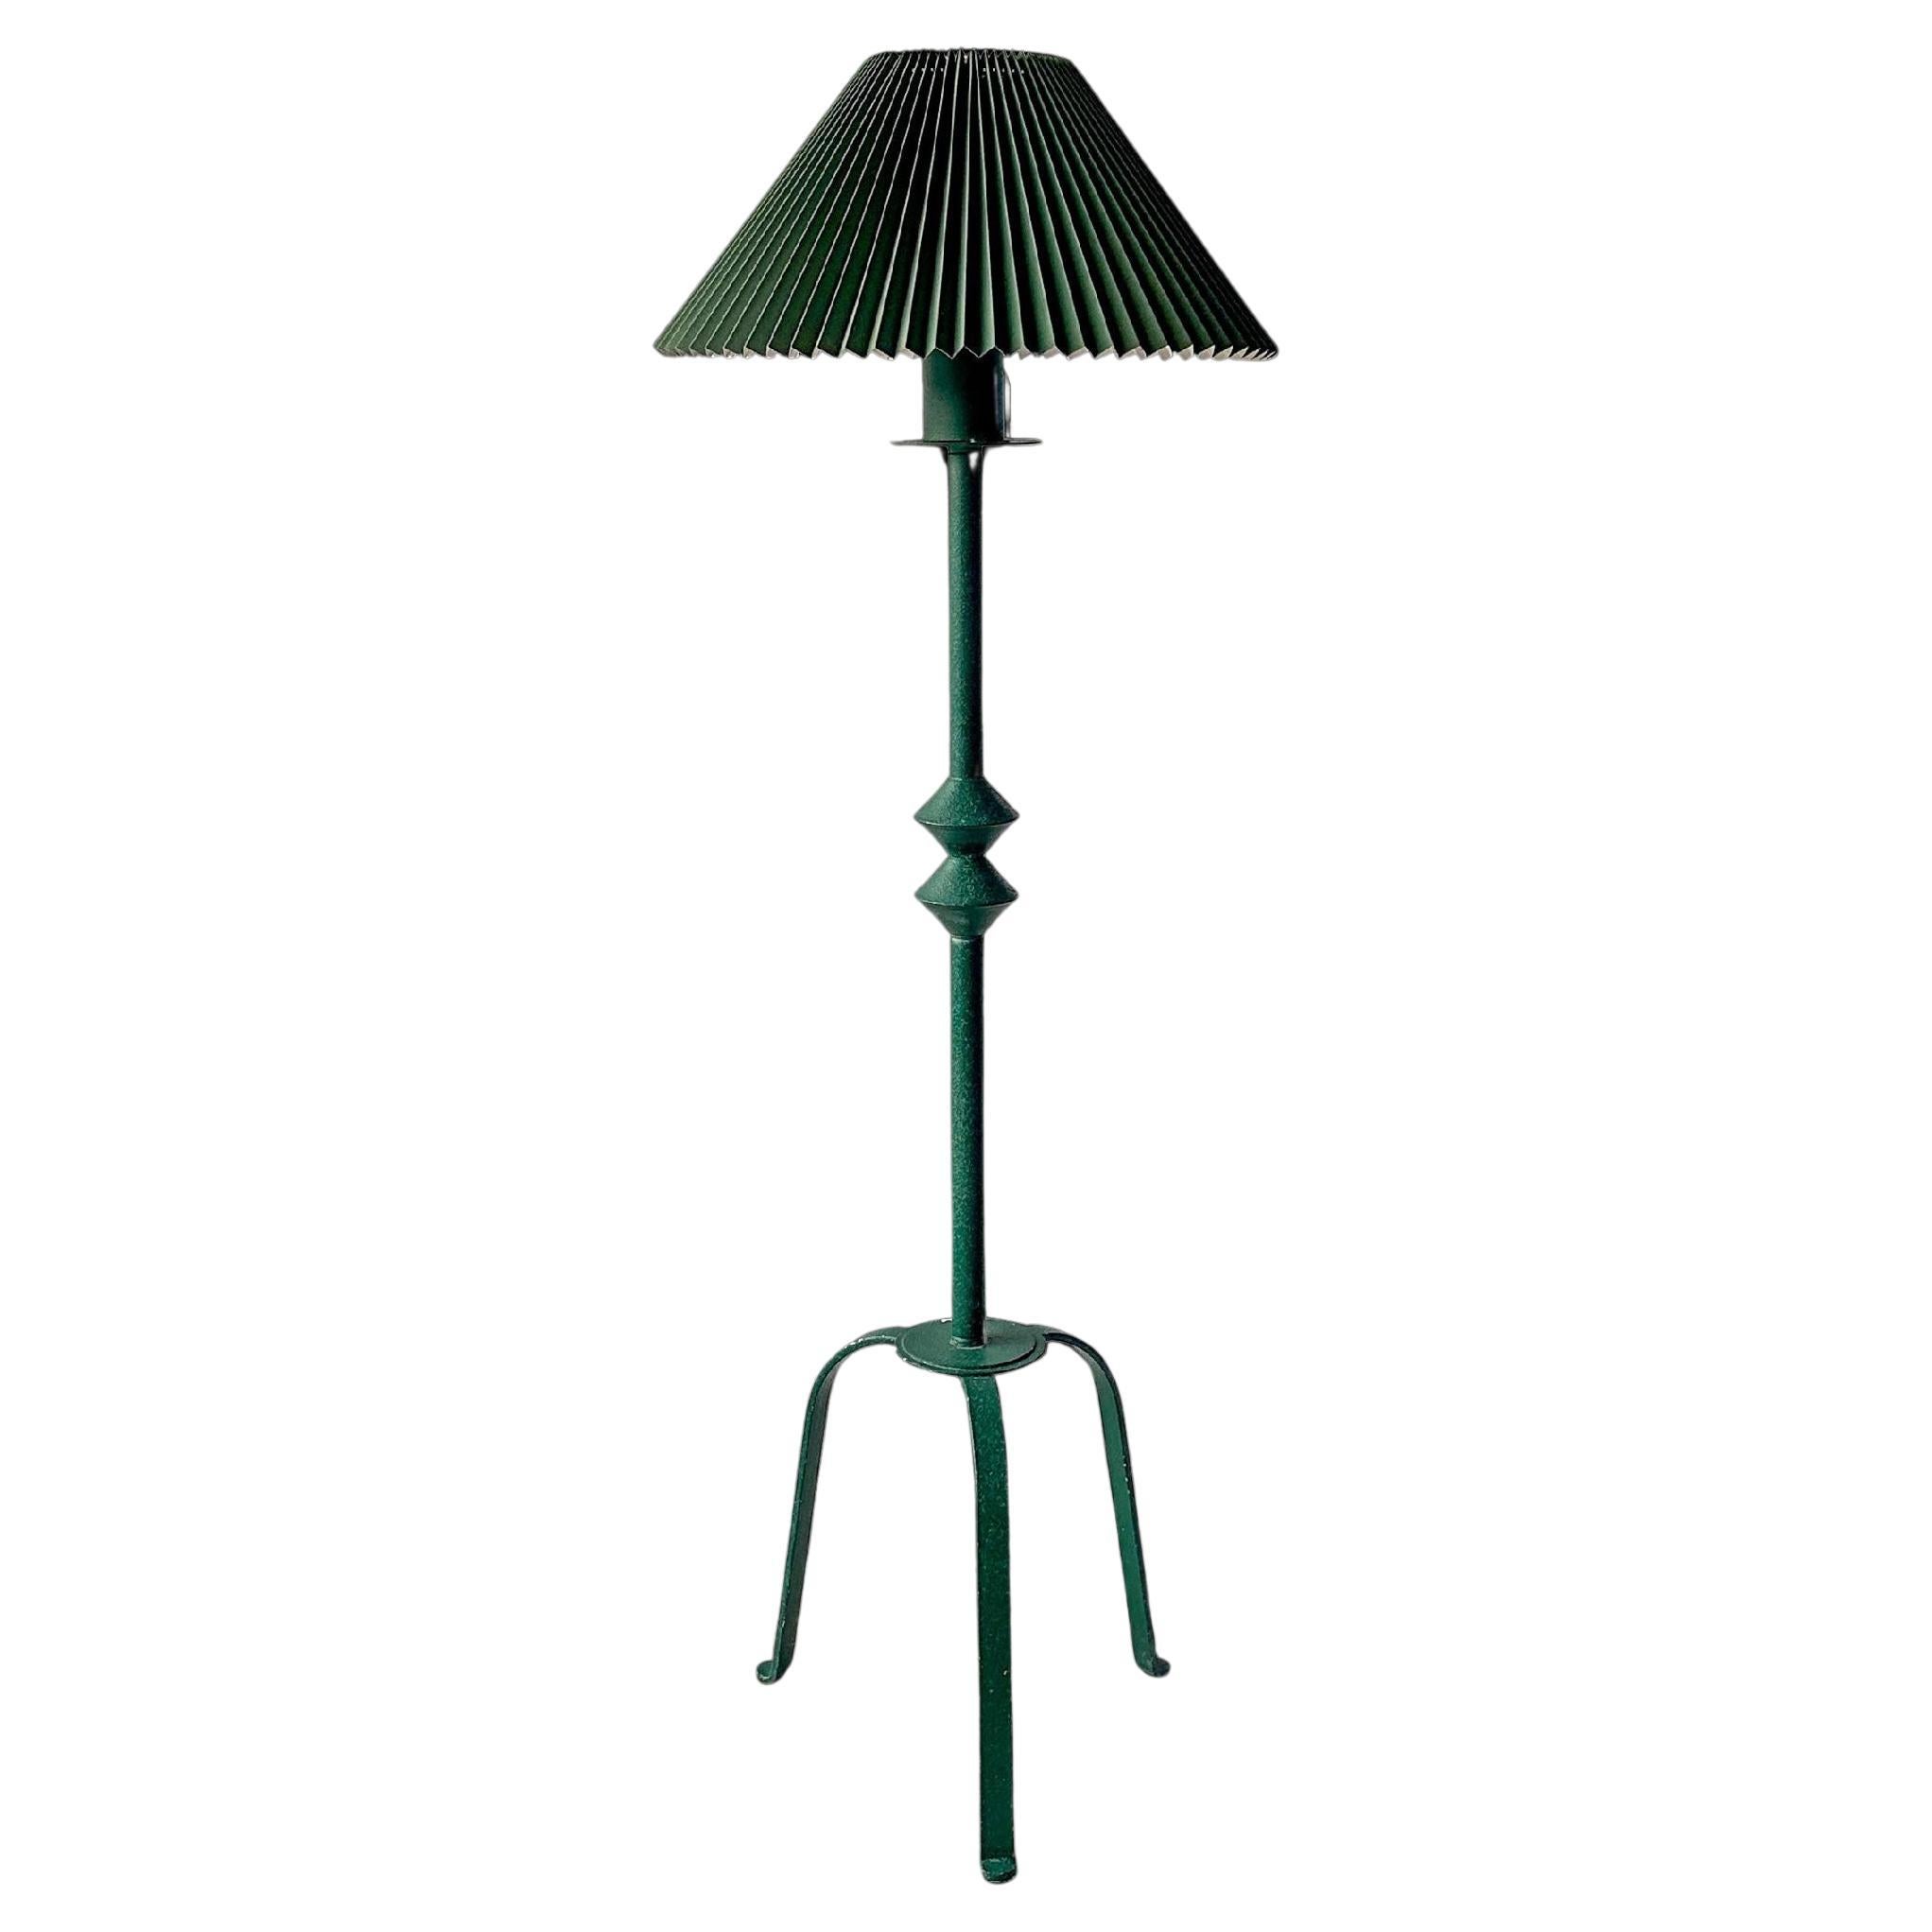 Giacometti Style Iron Floor Lamp With Pleated Shade